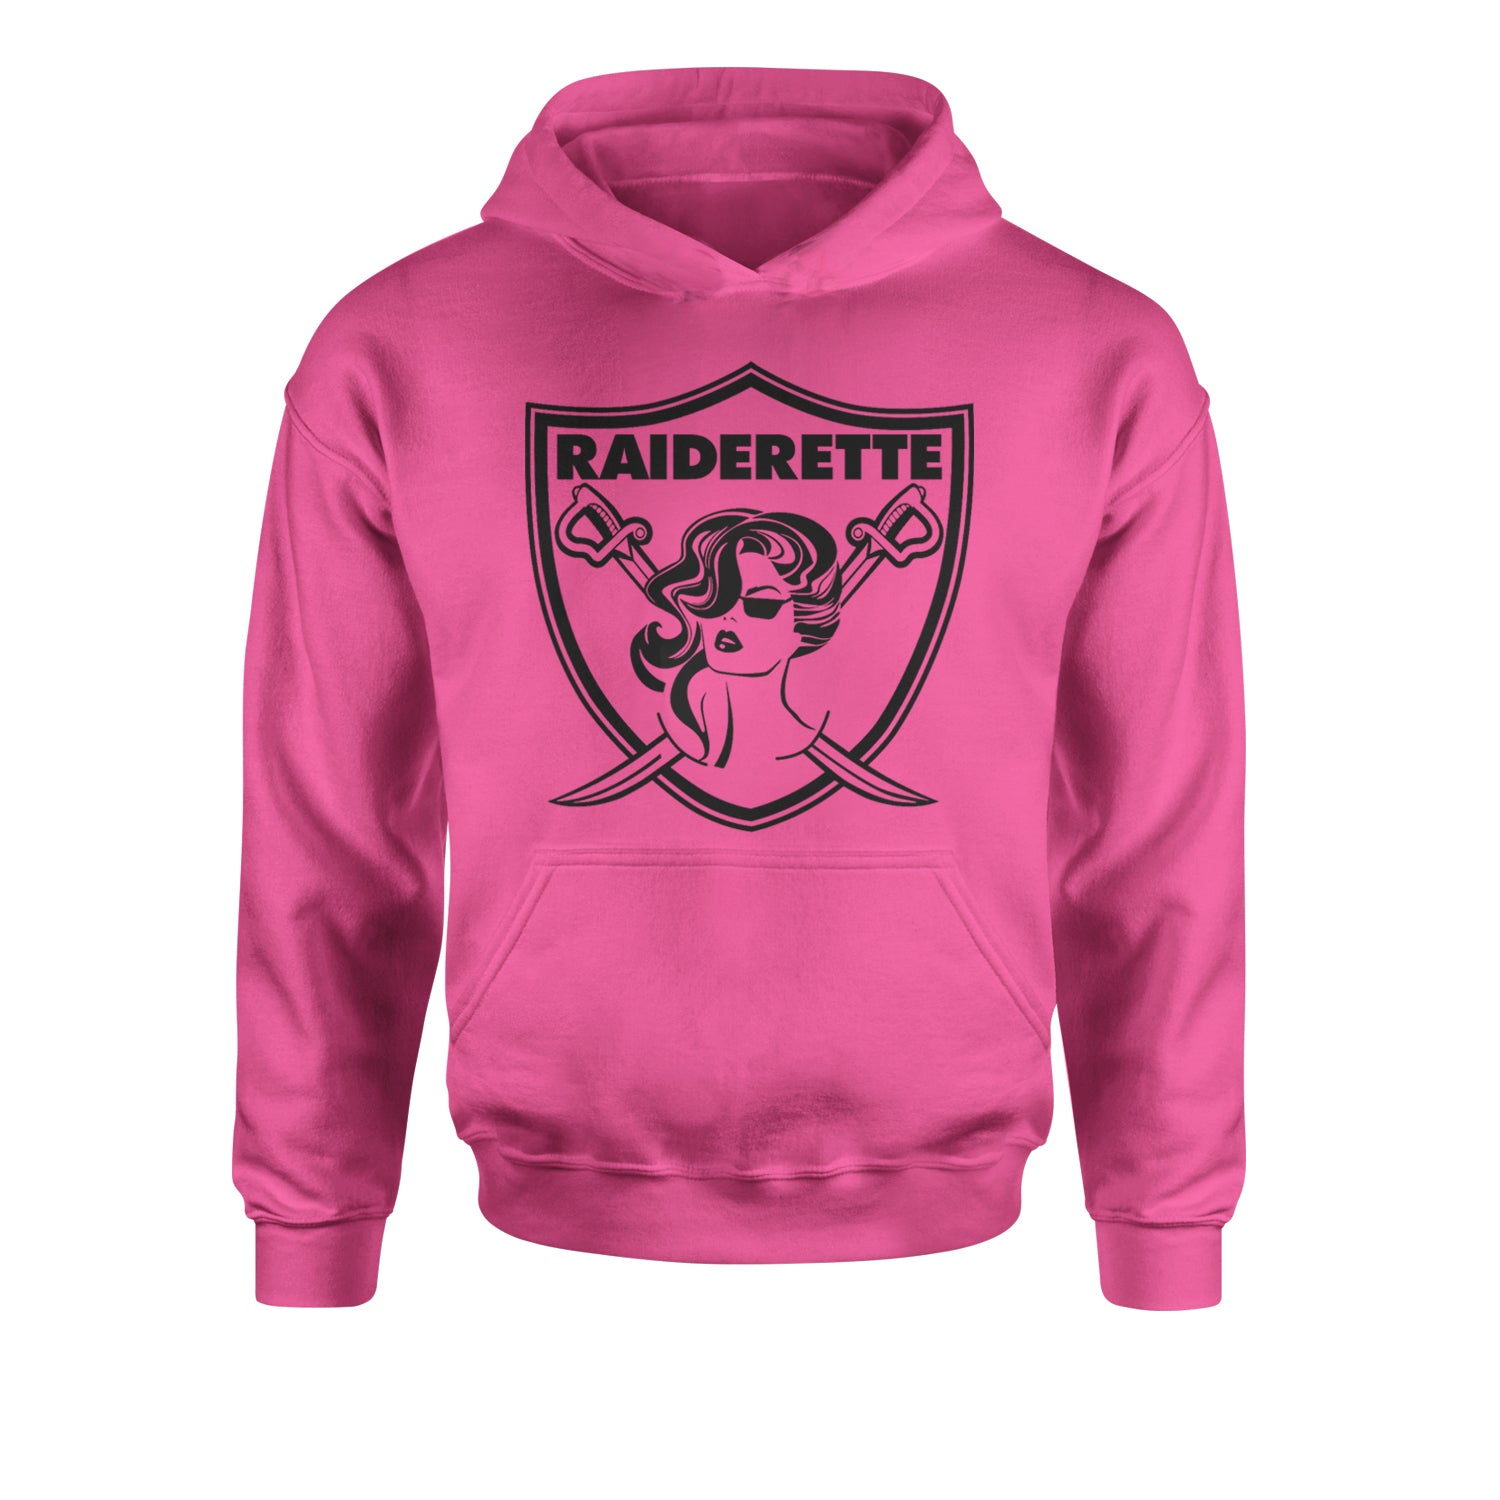 Raiderette Football Gameday Ready Youth-Sized Hoodie